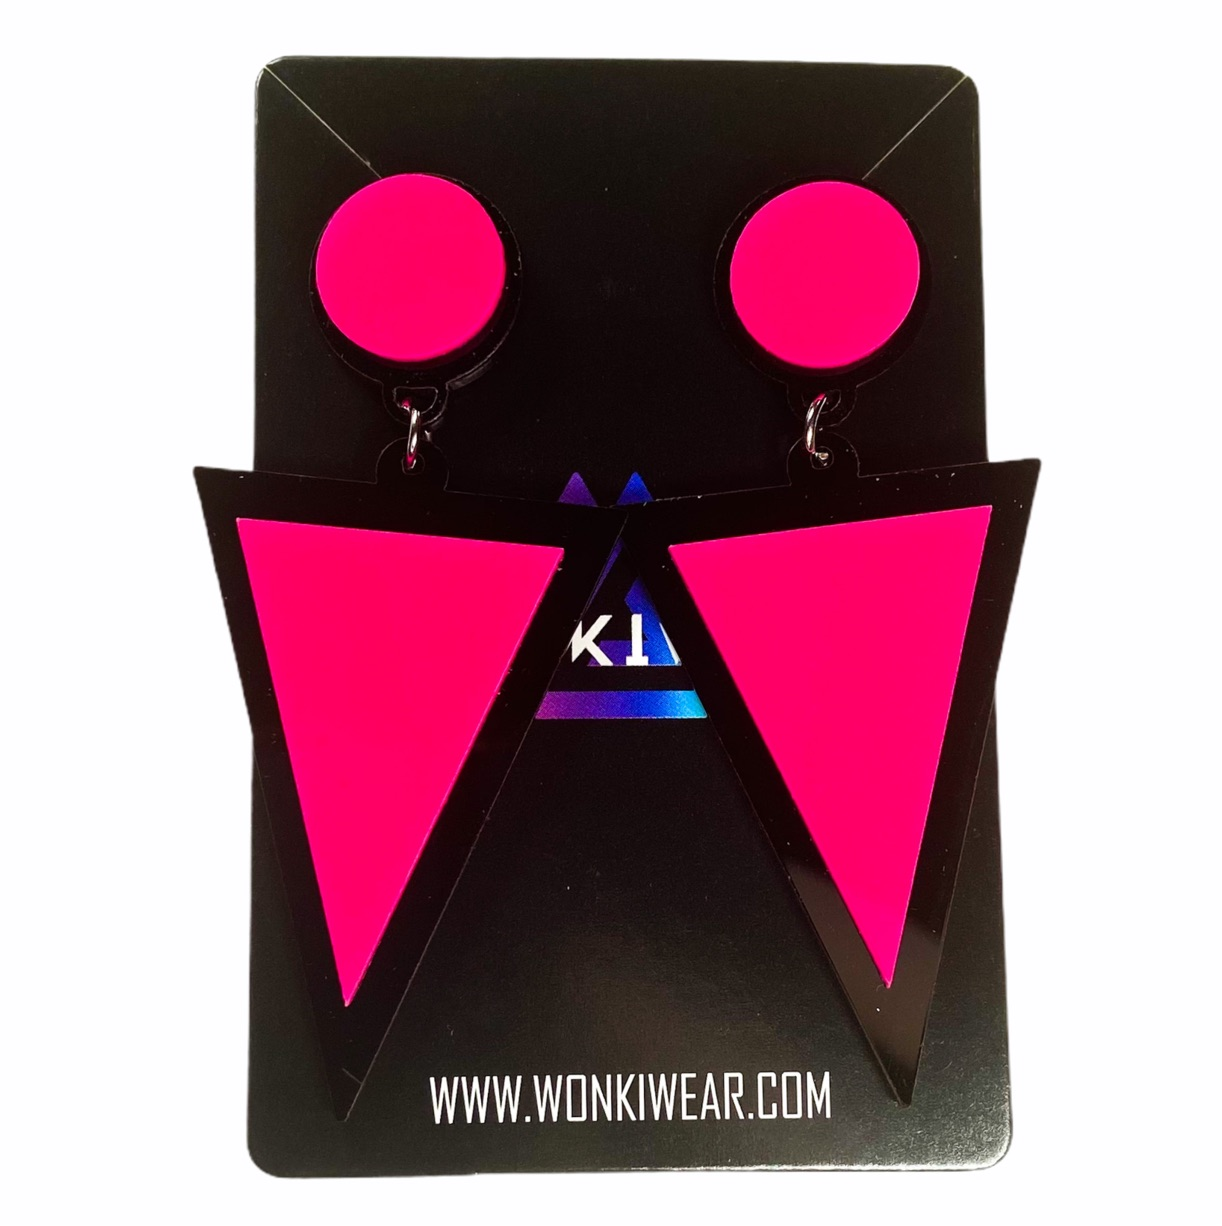 Earrings - Oversized geometric pink and black drops